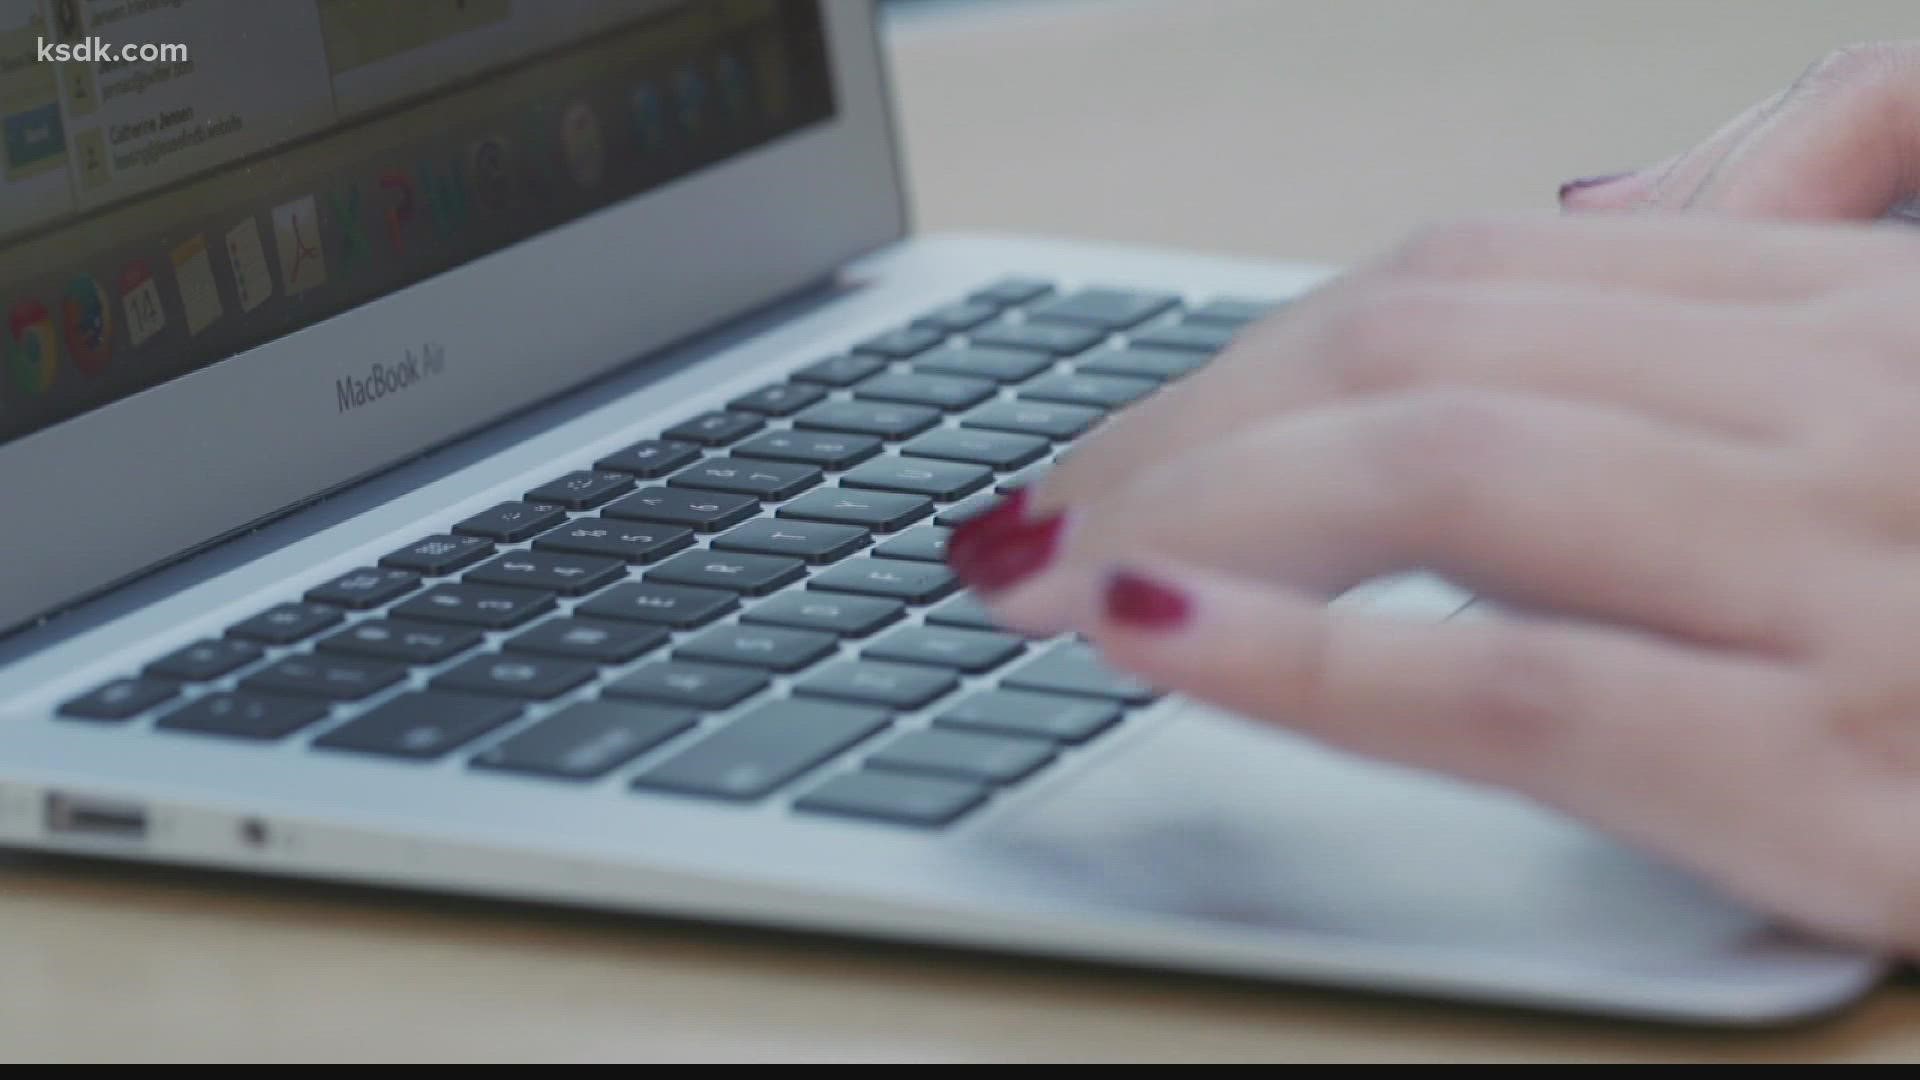 Consumer Reports has some tips to clean up your online history and keep your information safe.